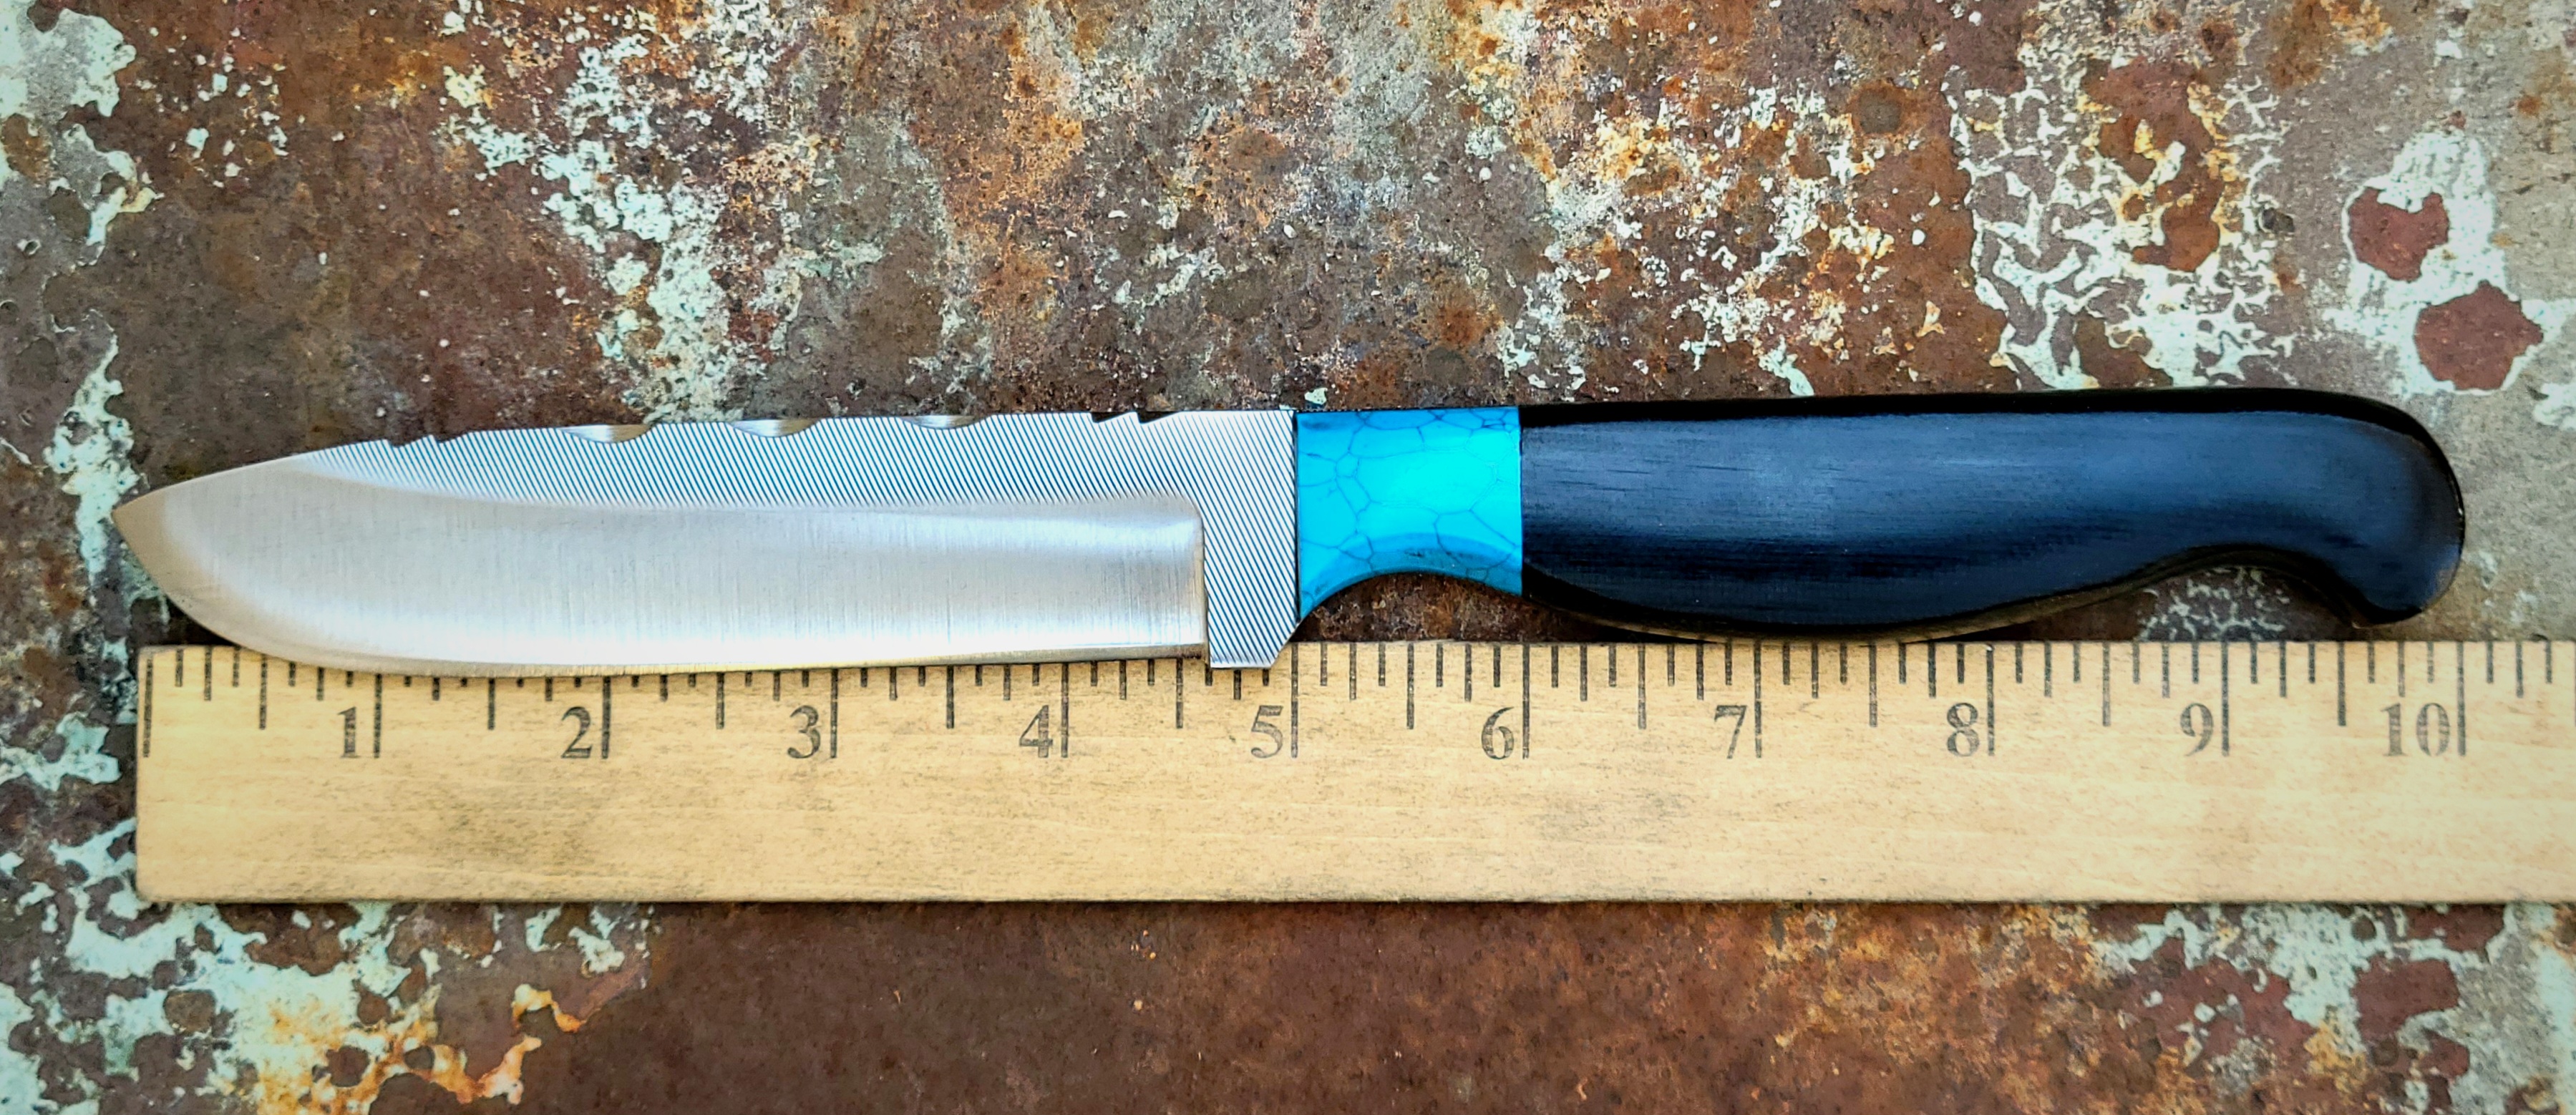 12F DK-TURQUOISE RECON-MICARTA-FW-POLISHED